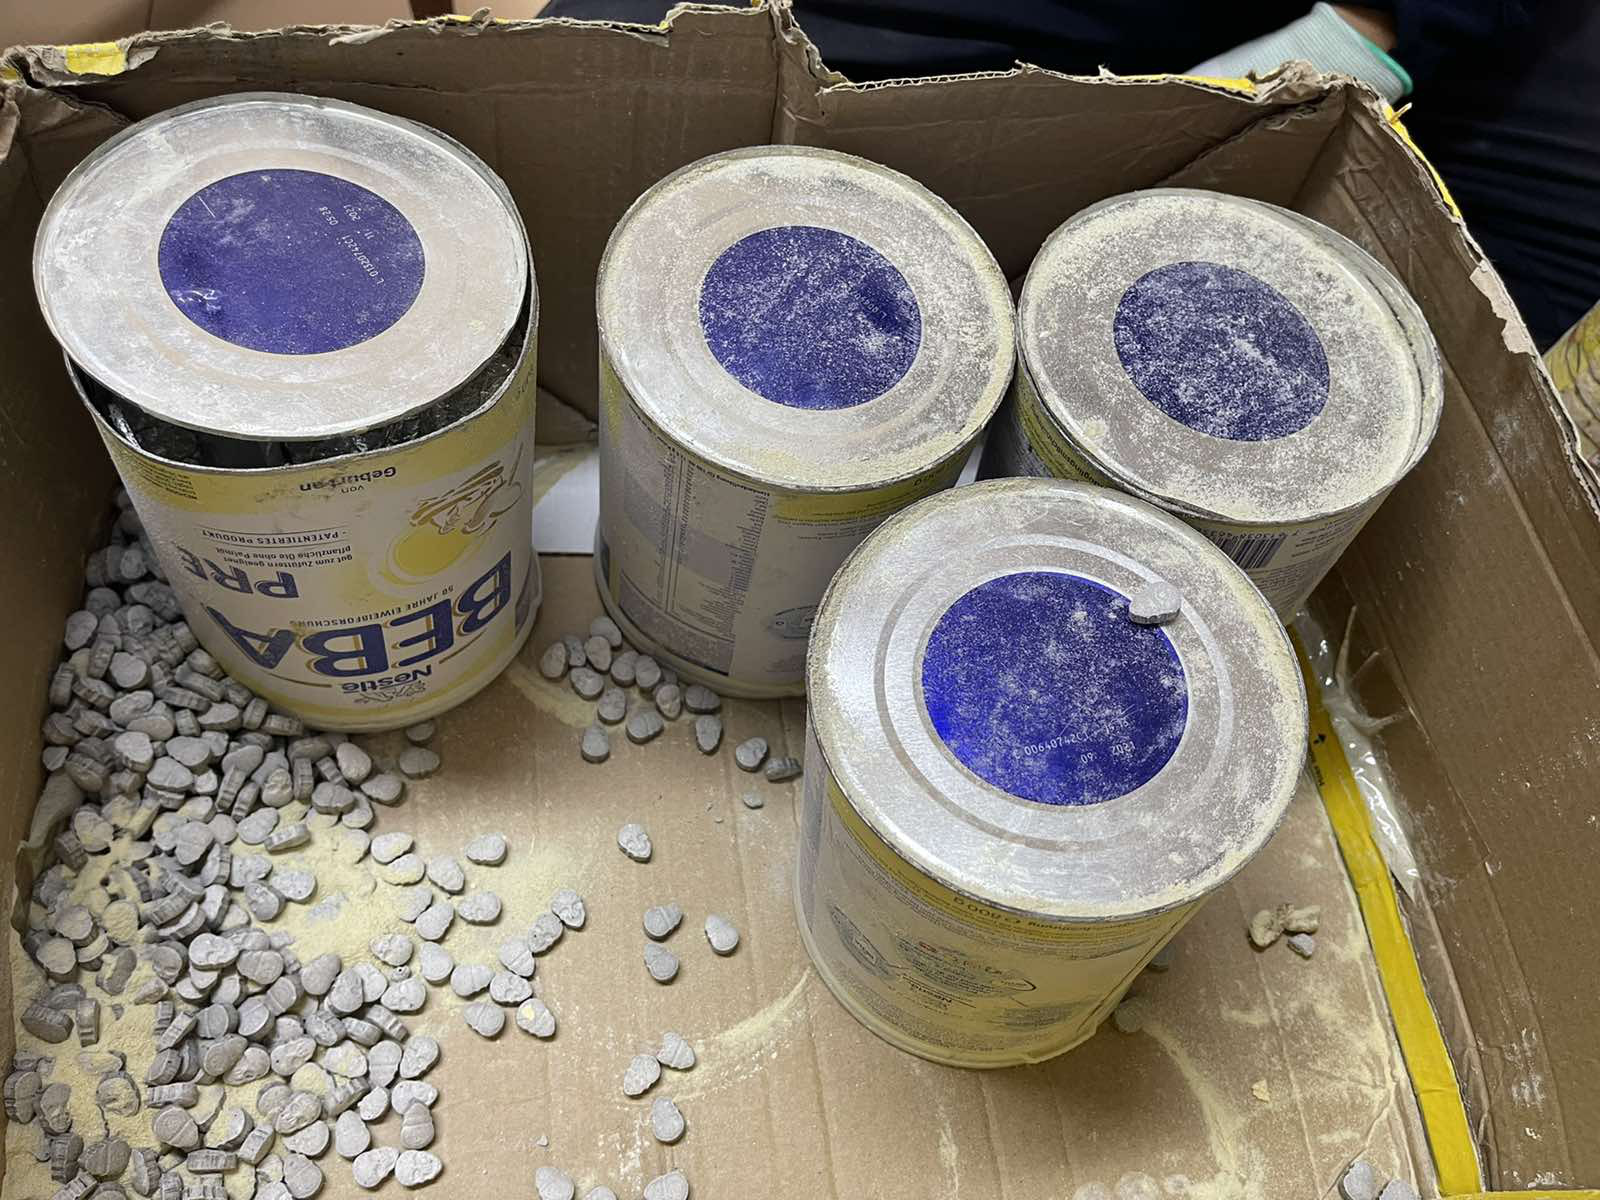 36kg of drugs found in imported canned products in Ho Chi Minh City